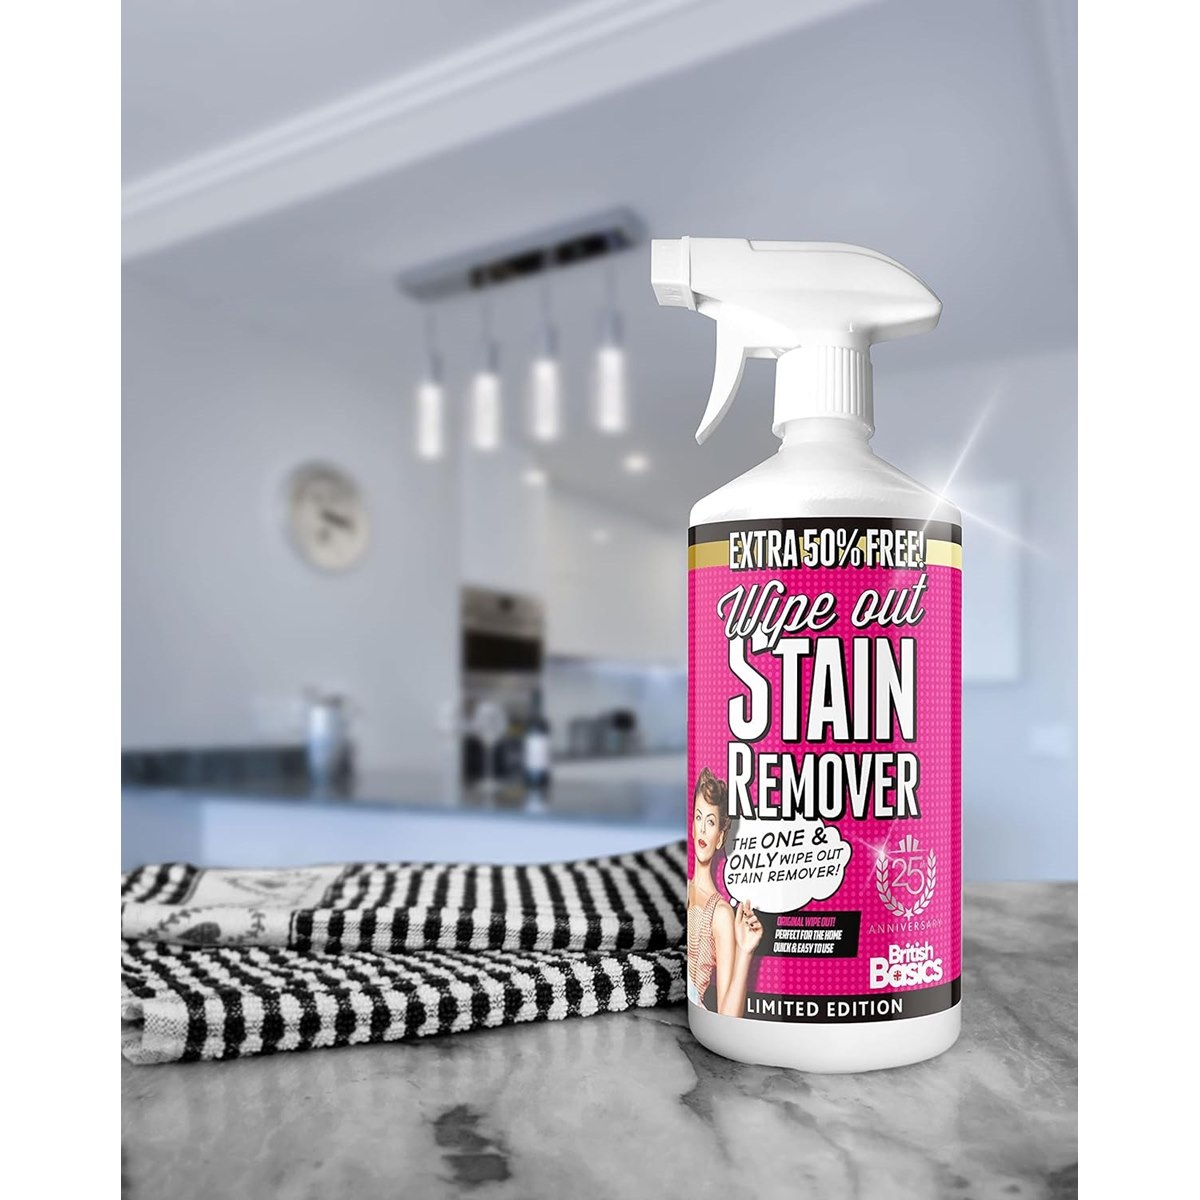 Wipe Out Stain Remover Spray